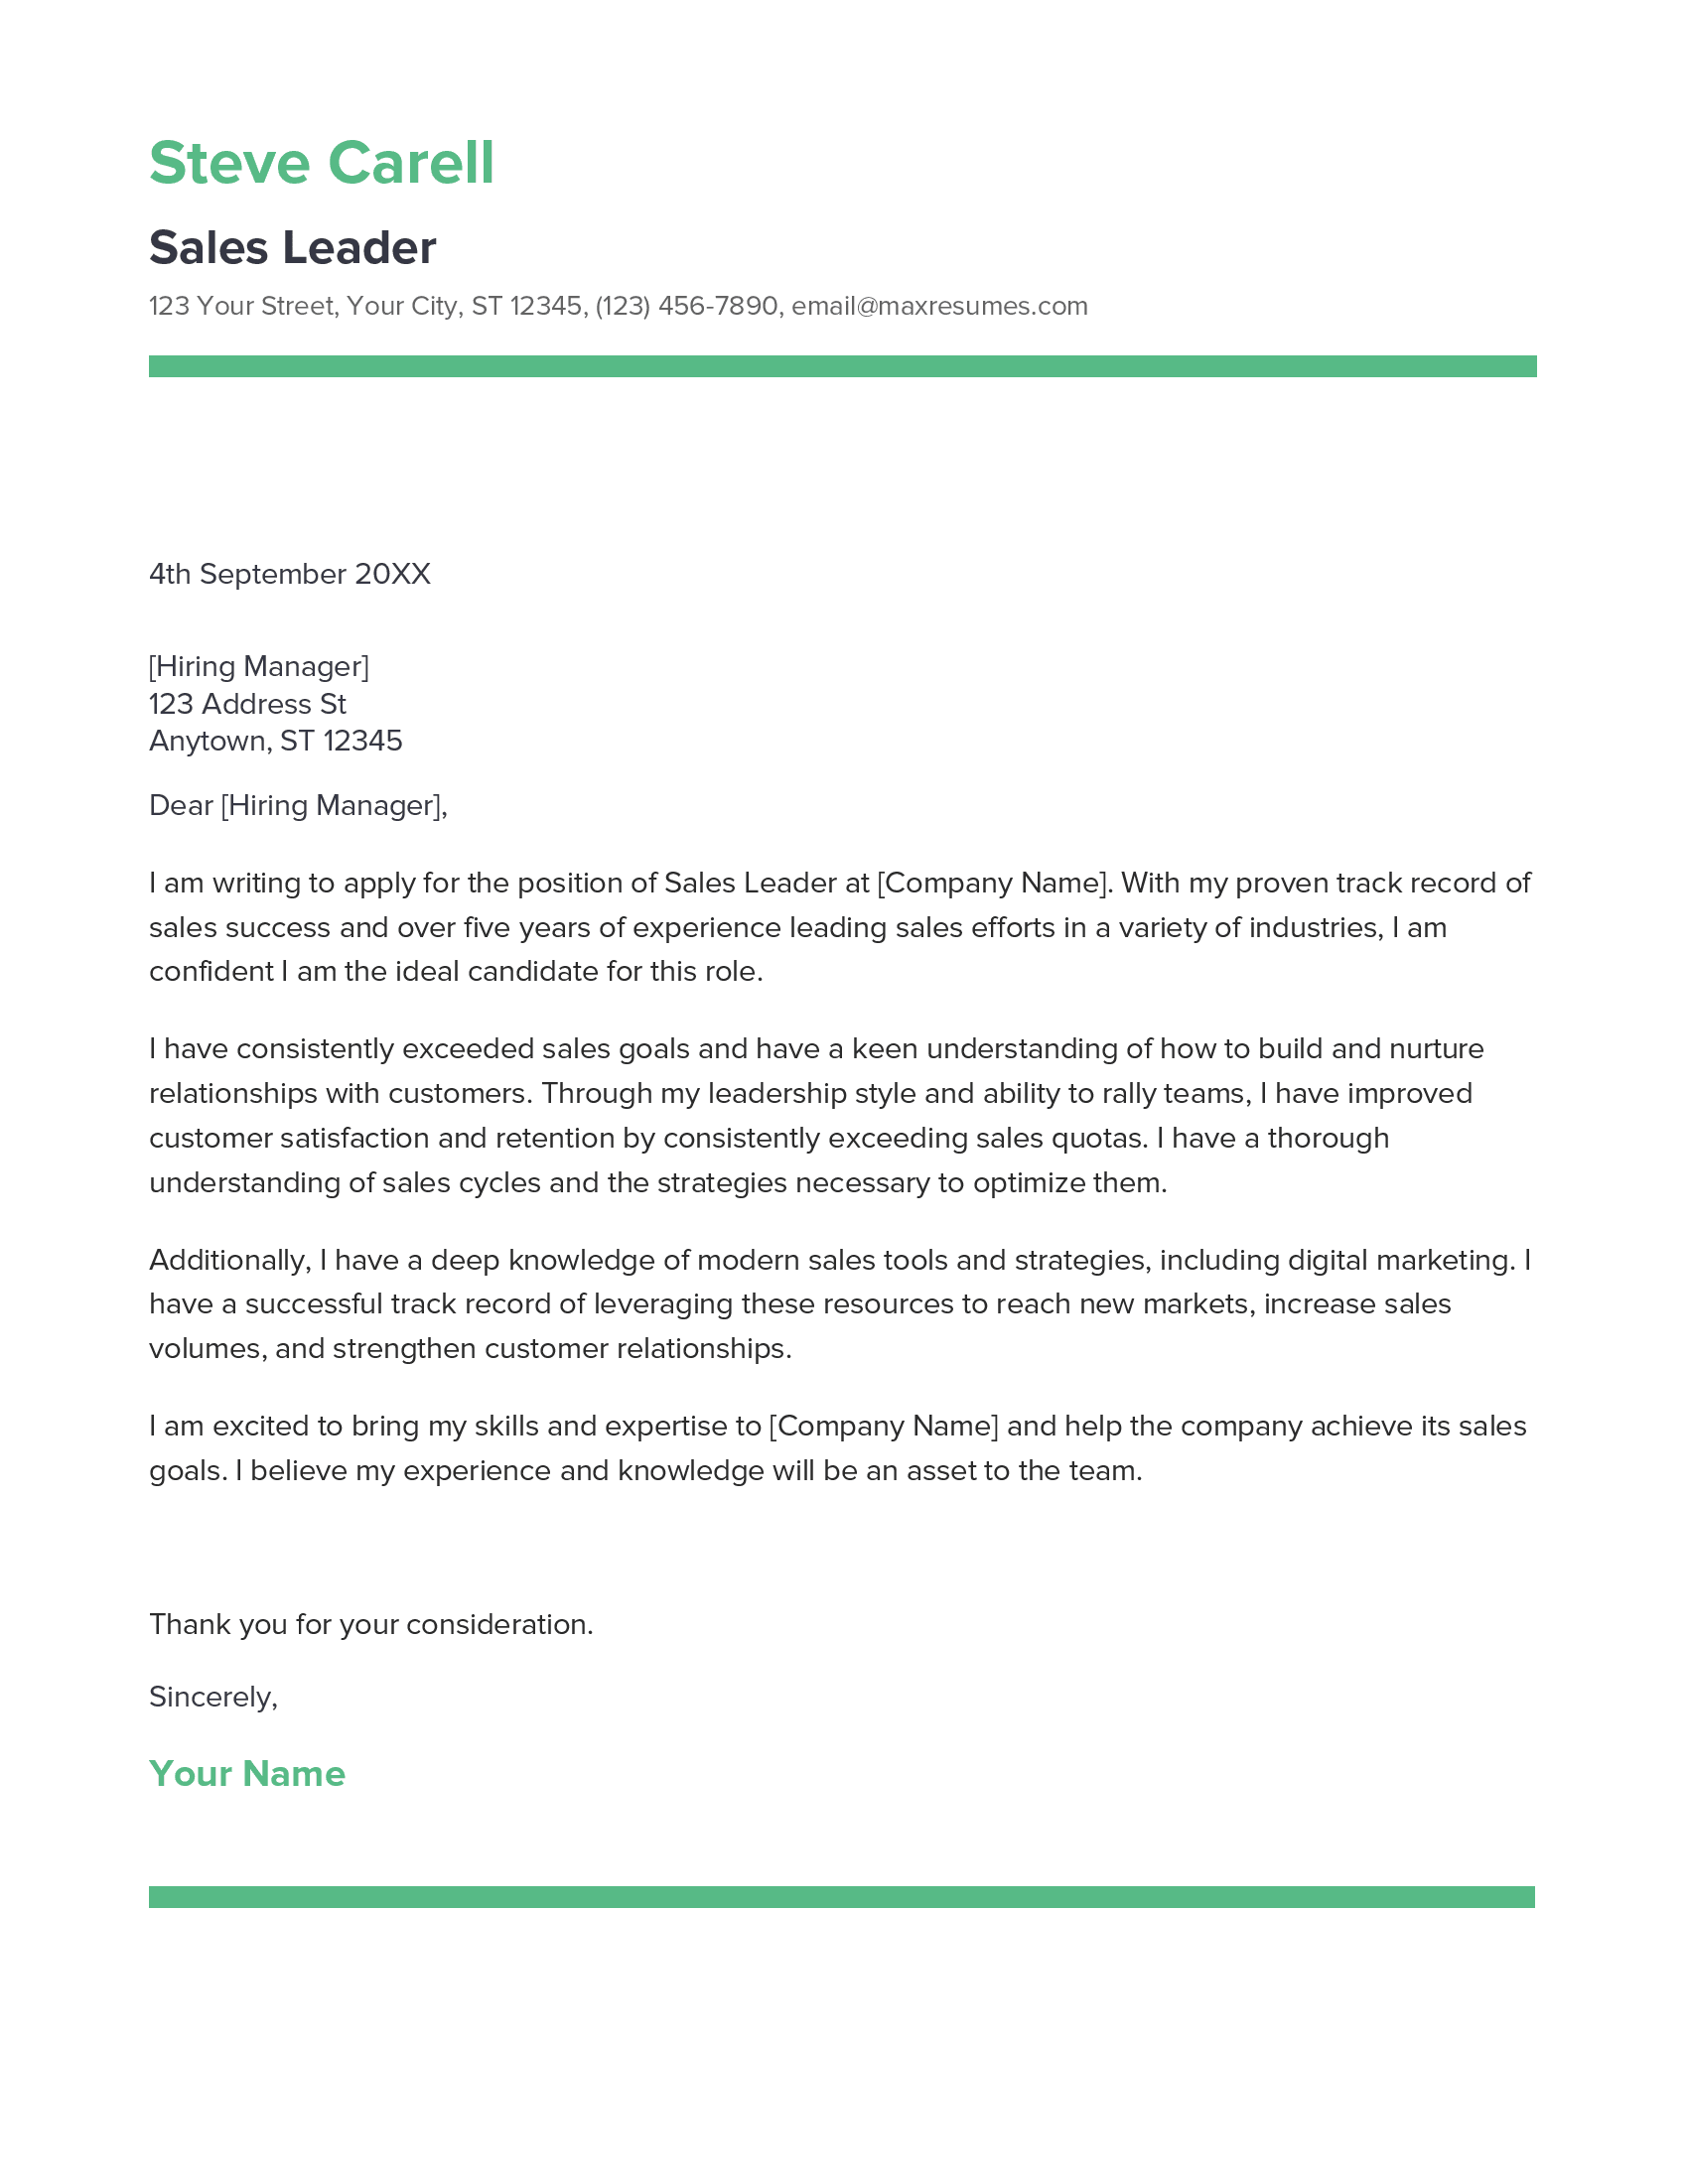 Sales Leader Cover Letter Example